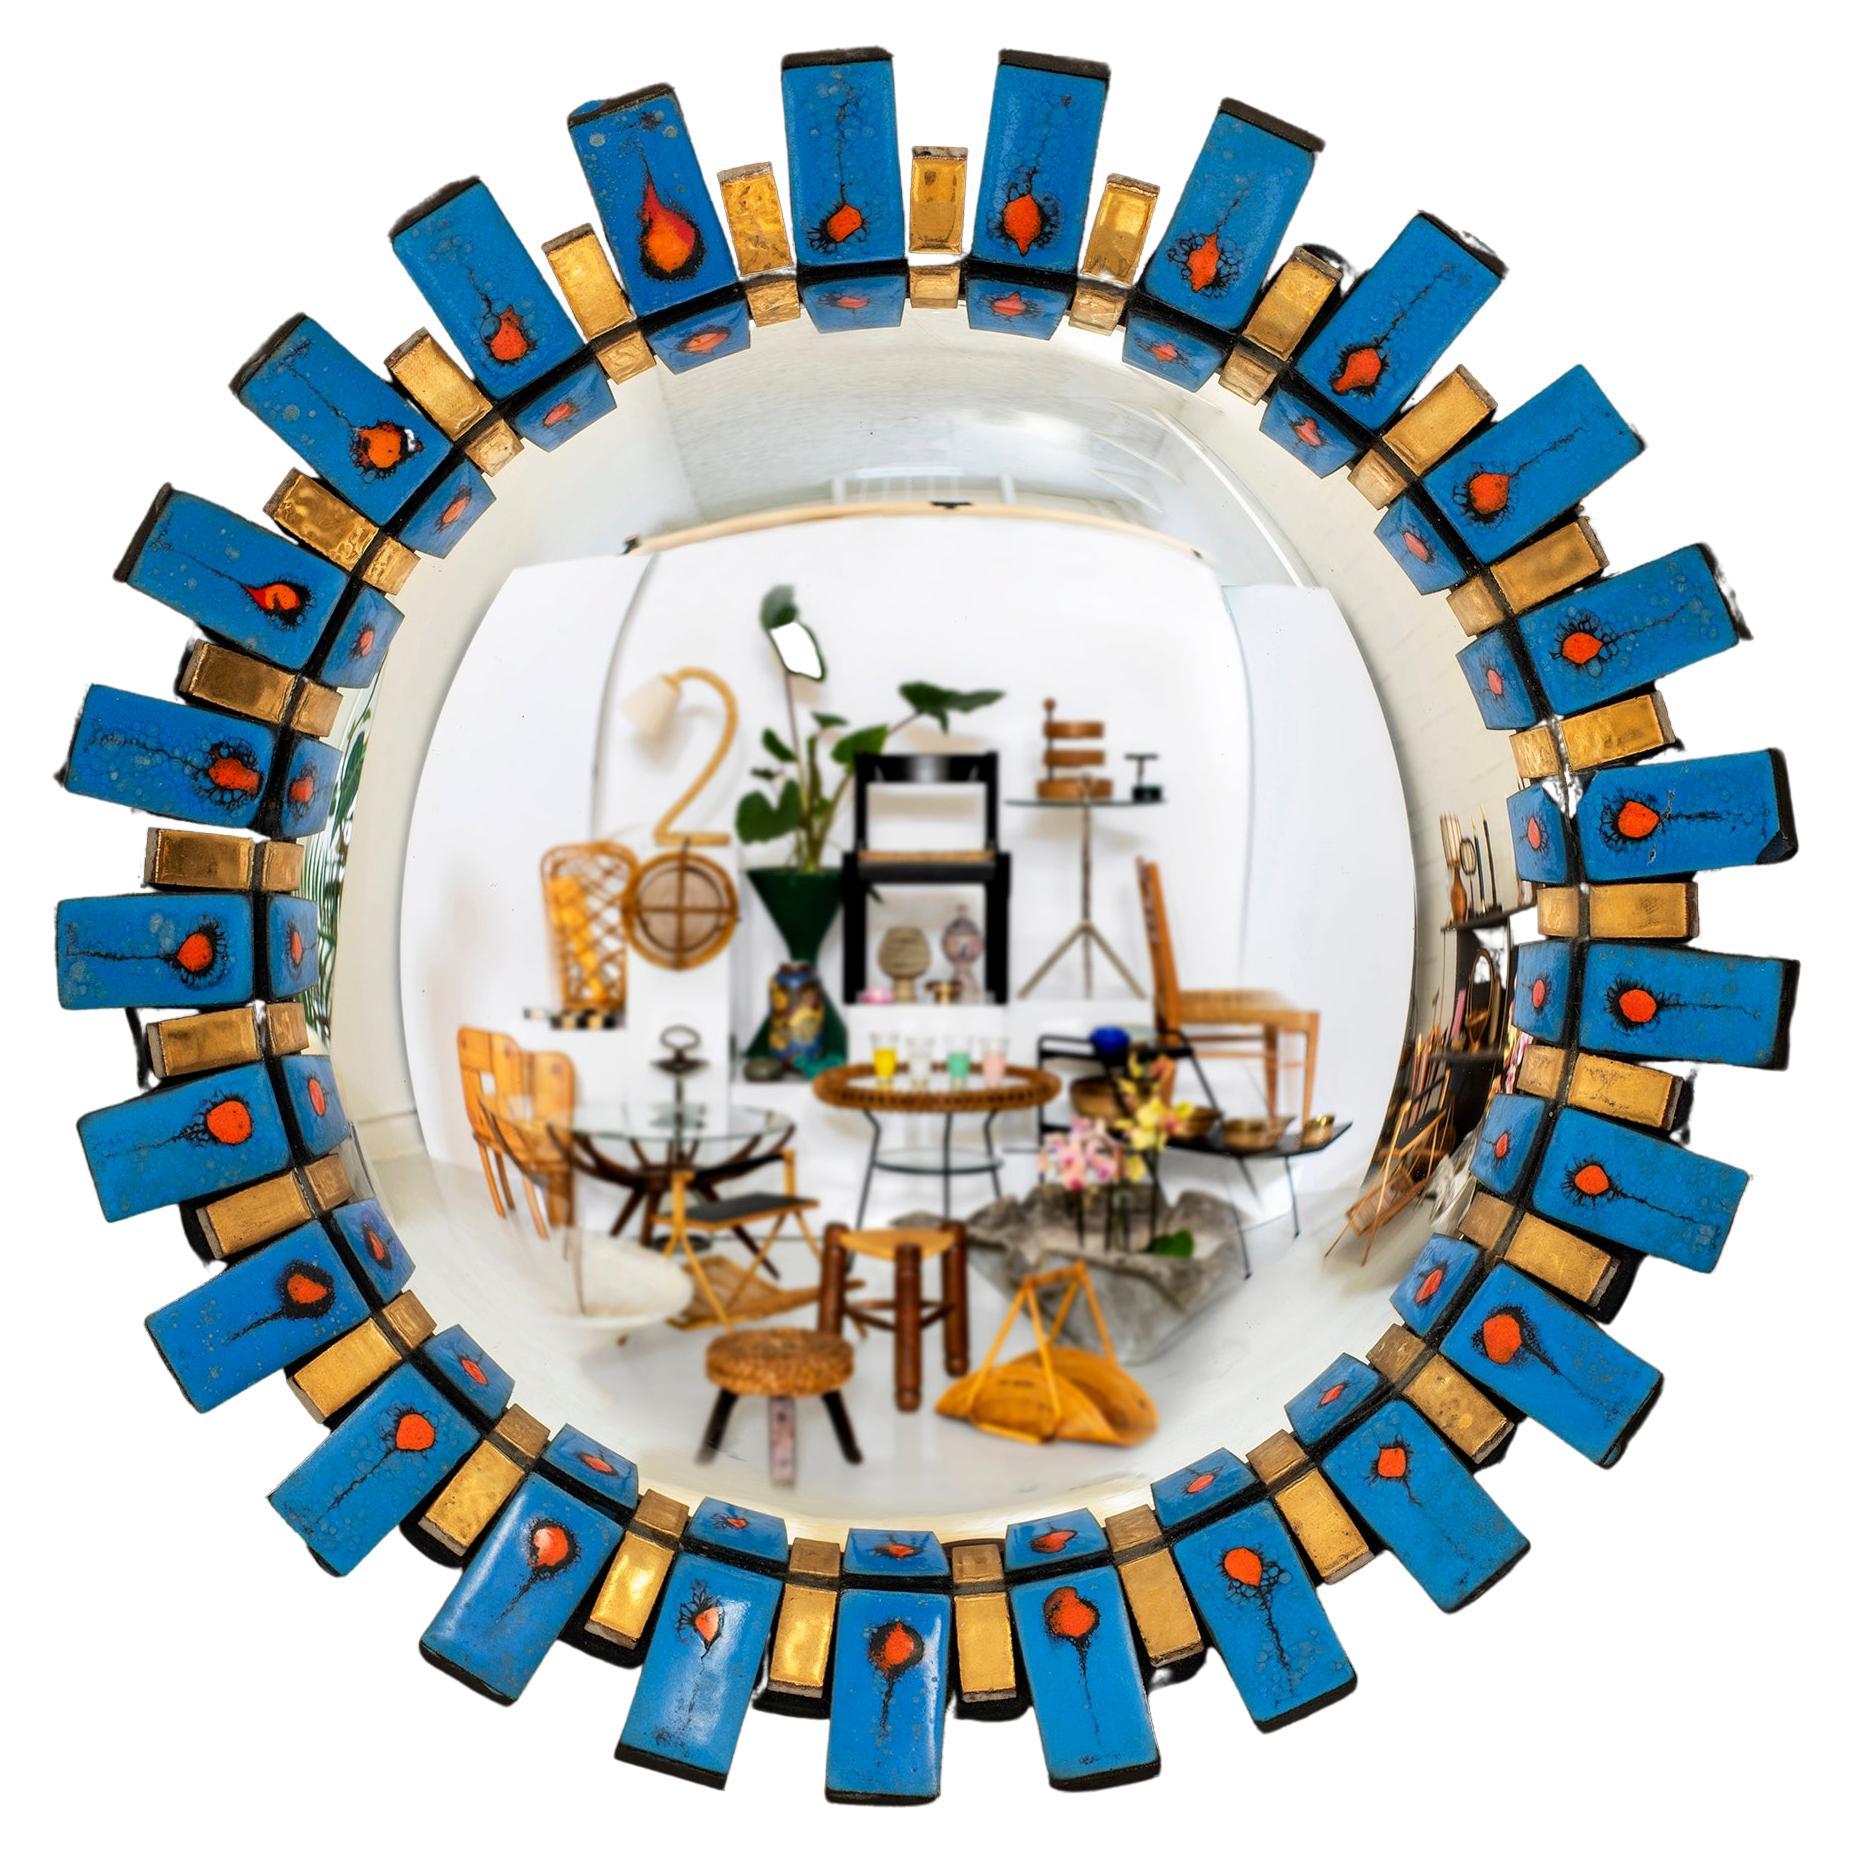 Italian Enamel Sunburst Convex mirror 
In the style of Francois Lembo 
Italy, circa 1950's
Dramatic accent mirror with vibrant color, texture and design
Timeless classic 
Light surface markings to mirror
Patina from age and use